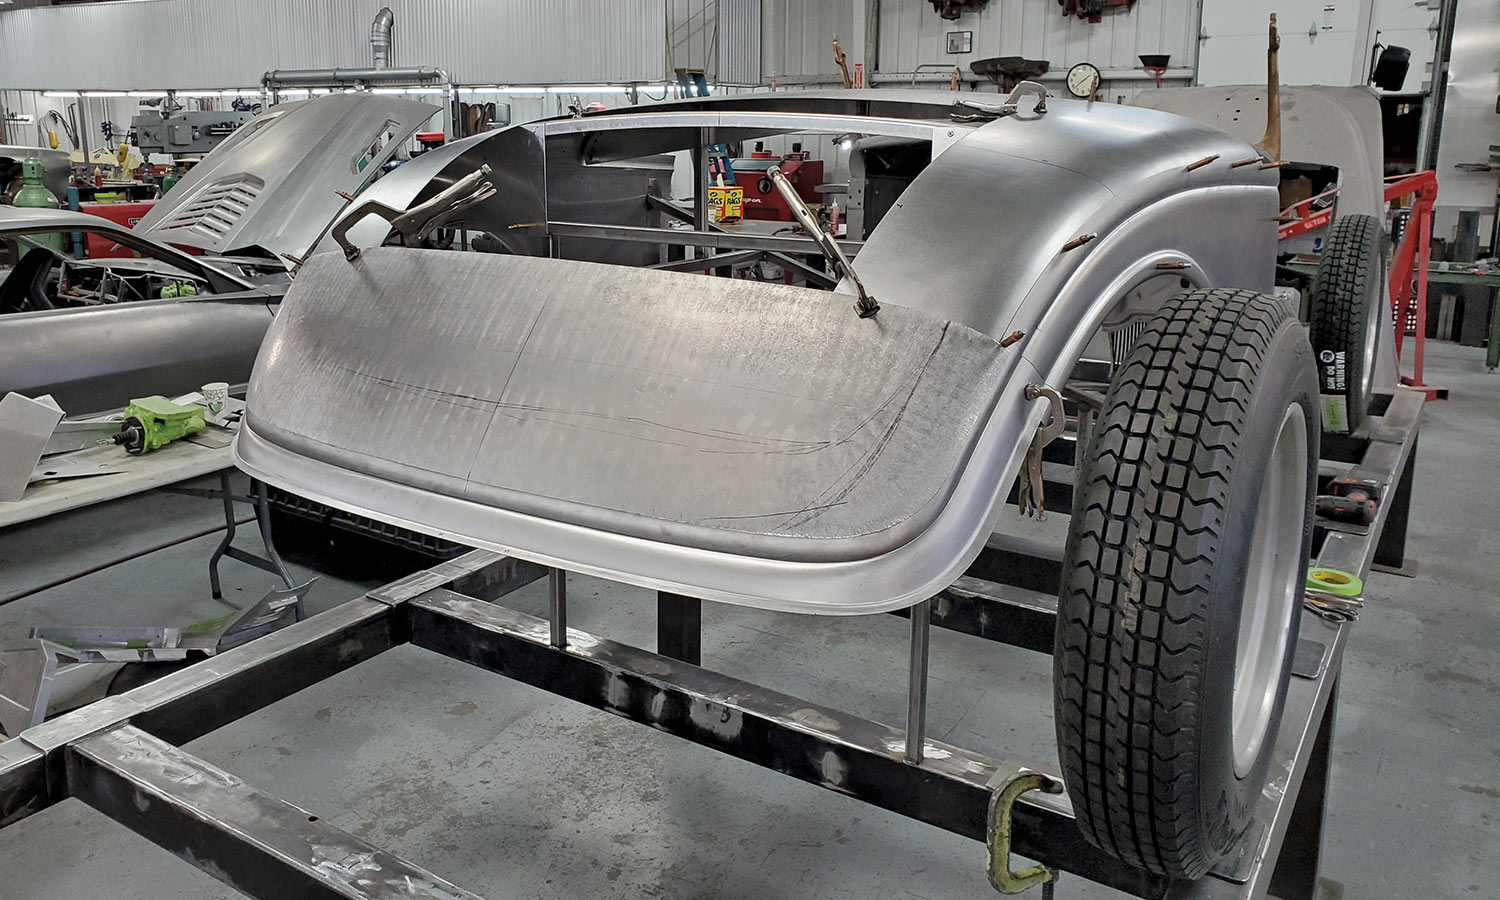 metal panel that fits below the decklid tested on frame